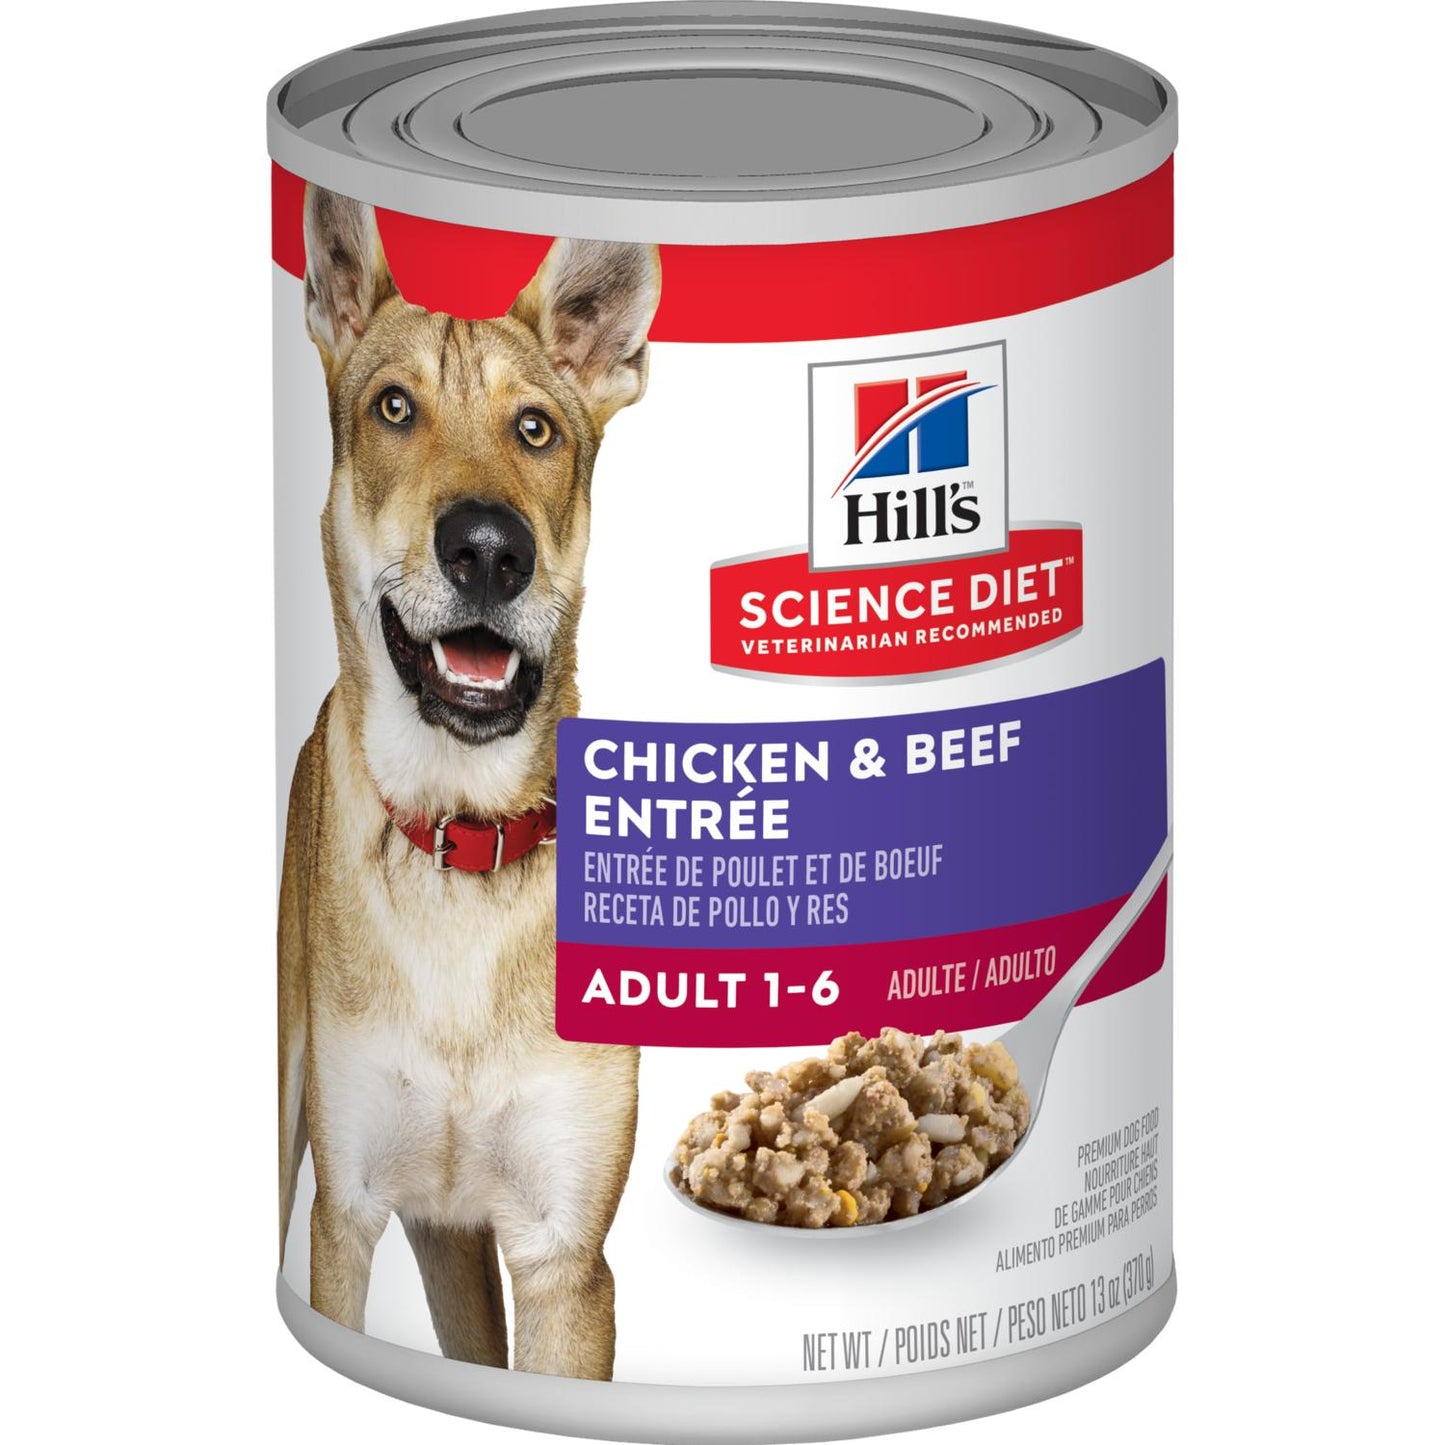 Hill's Science Diet Adult Chicken & Beef Entrée dog food  Canned Dog Food  | PetMax Canada